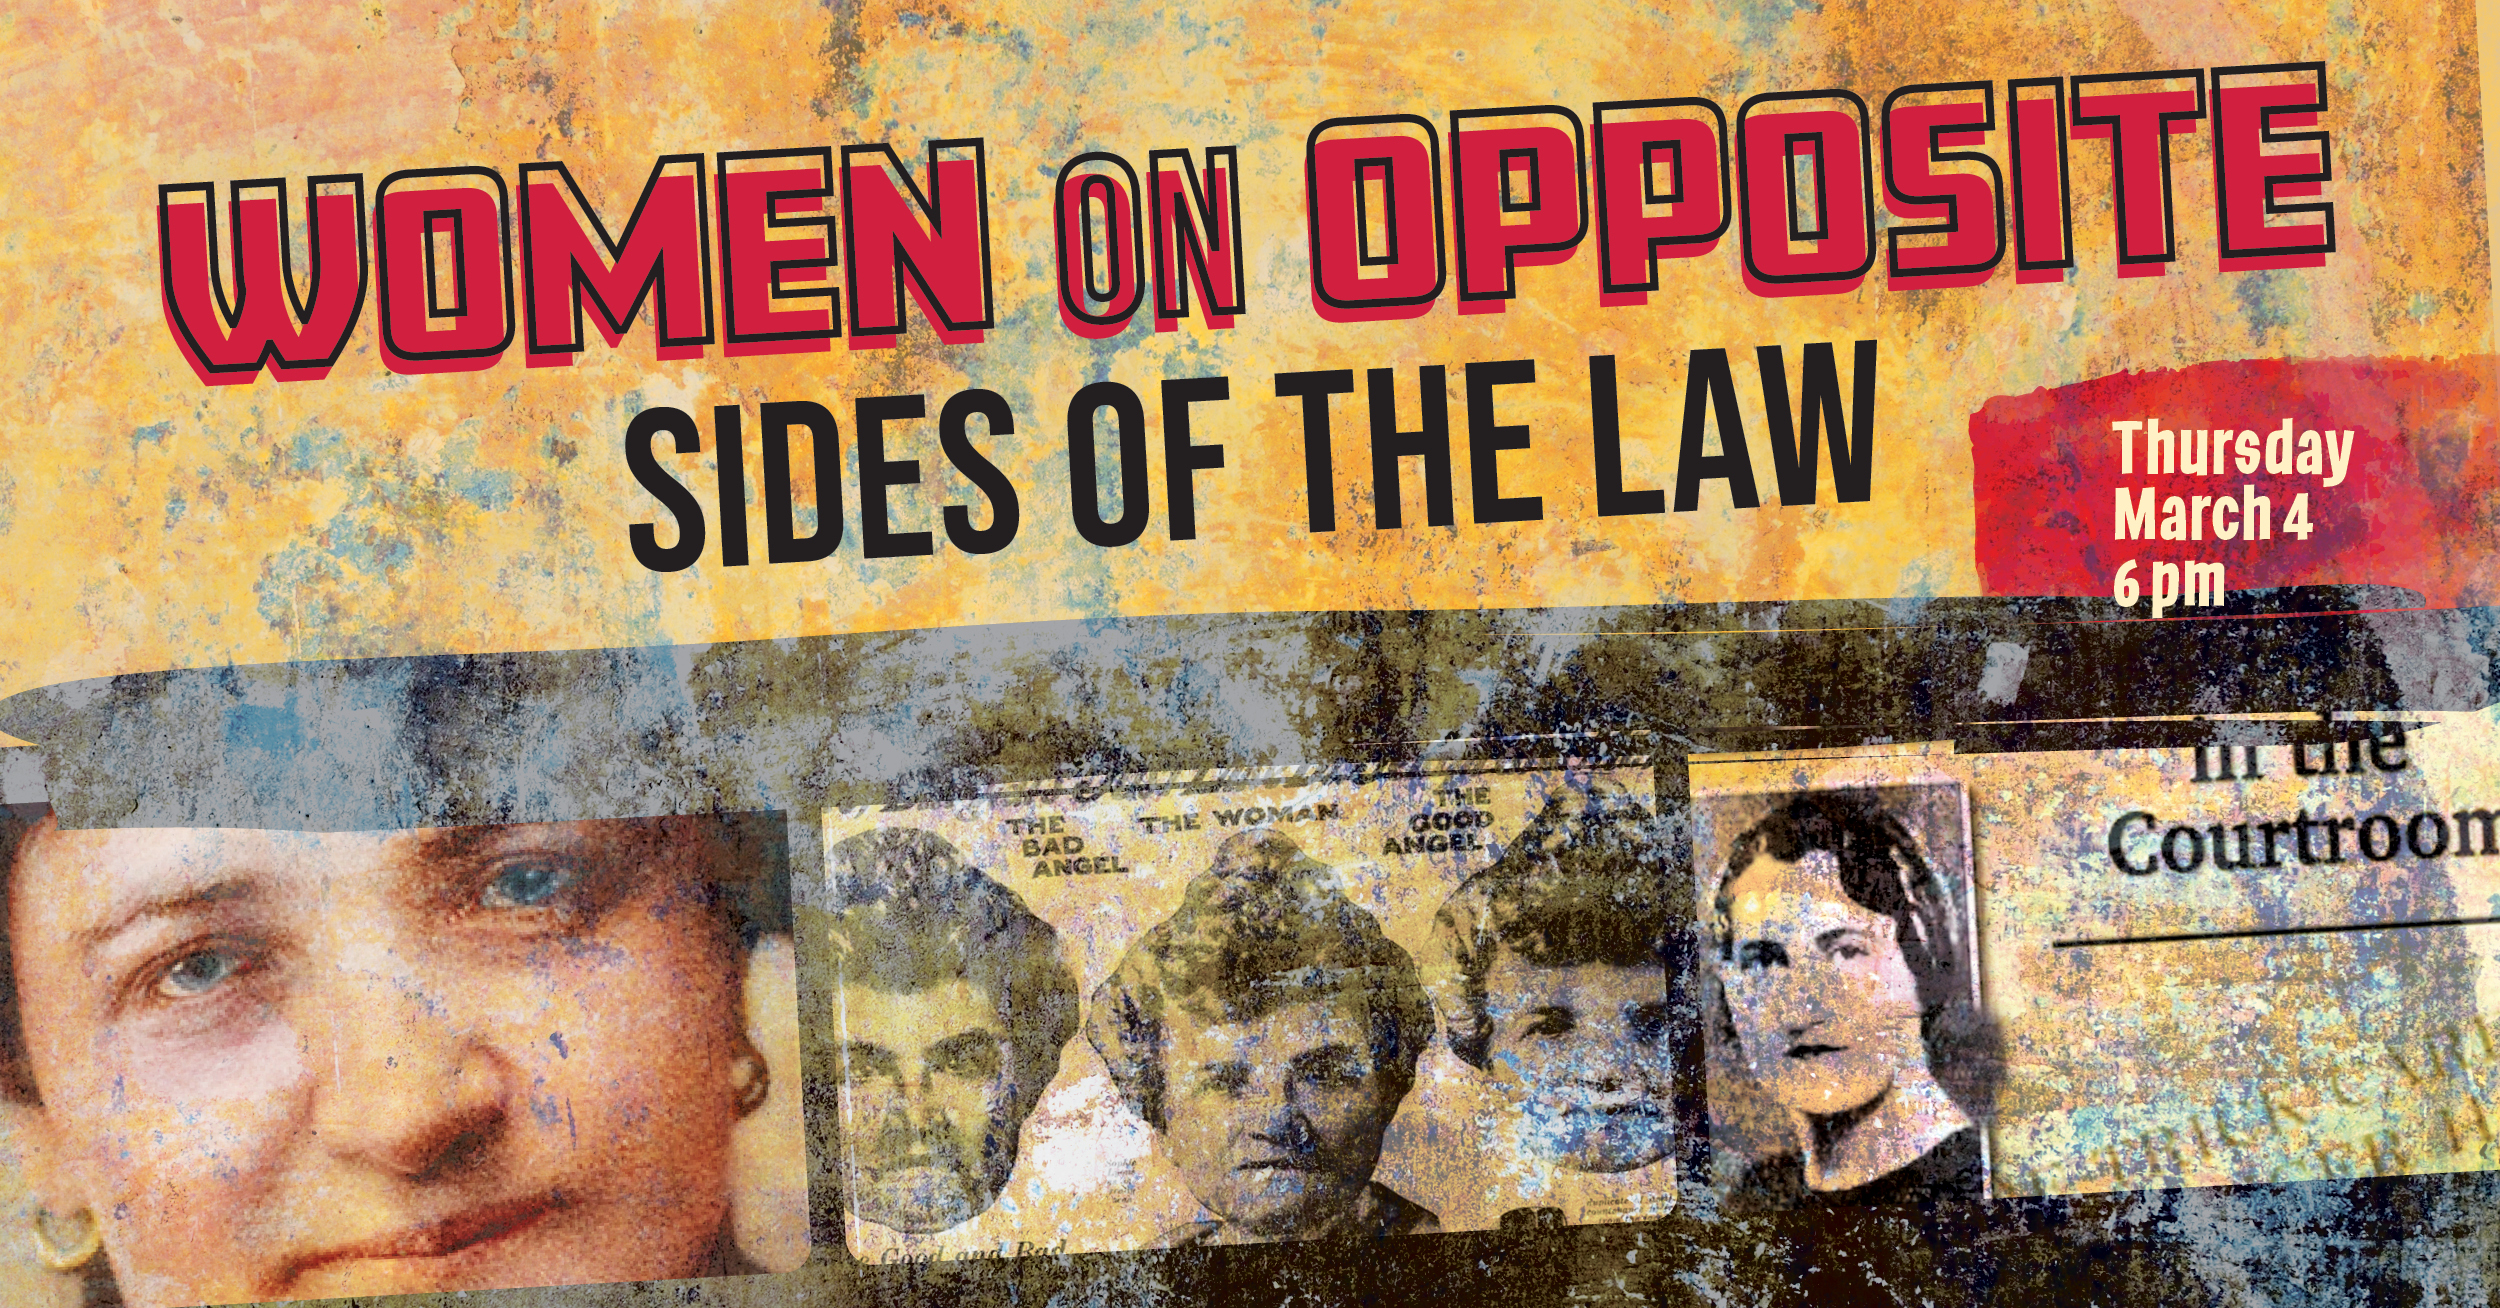 Women on Opposite Sides of the Law image